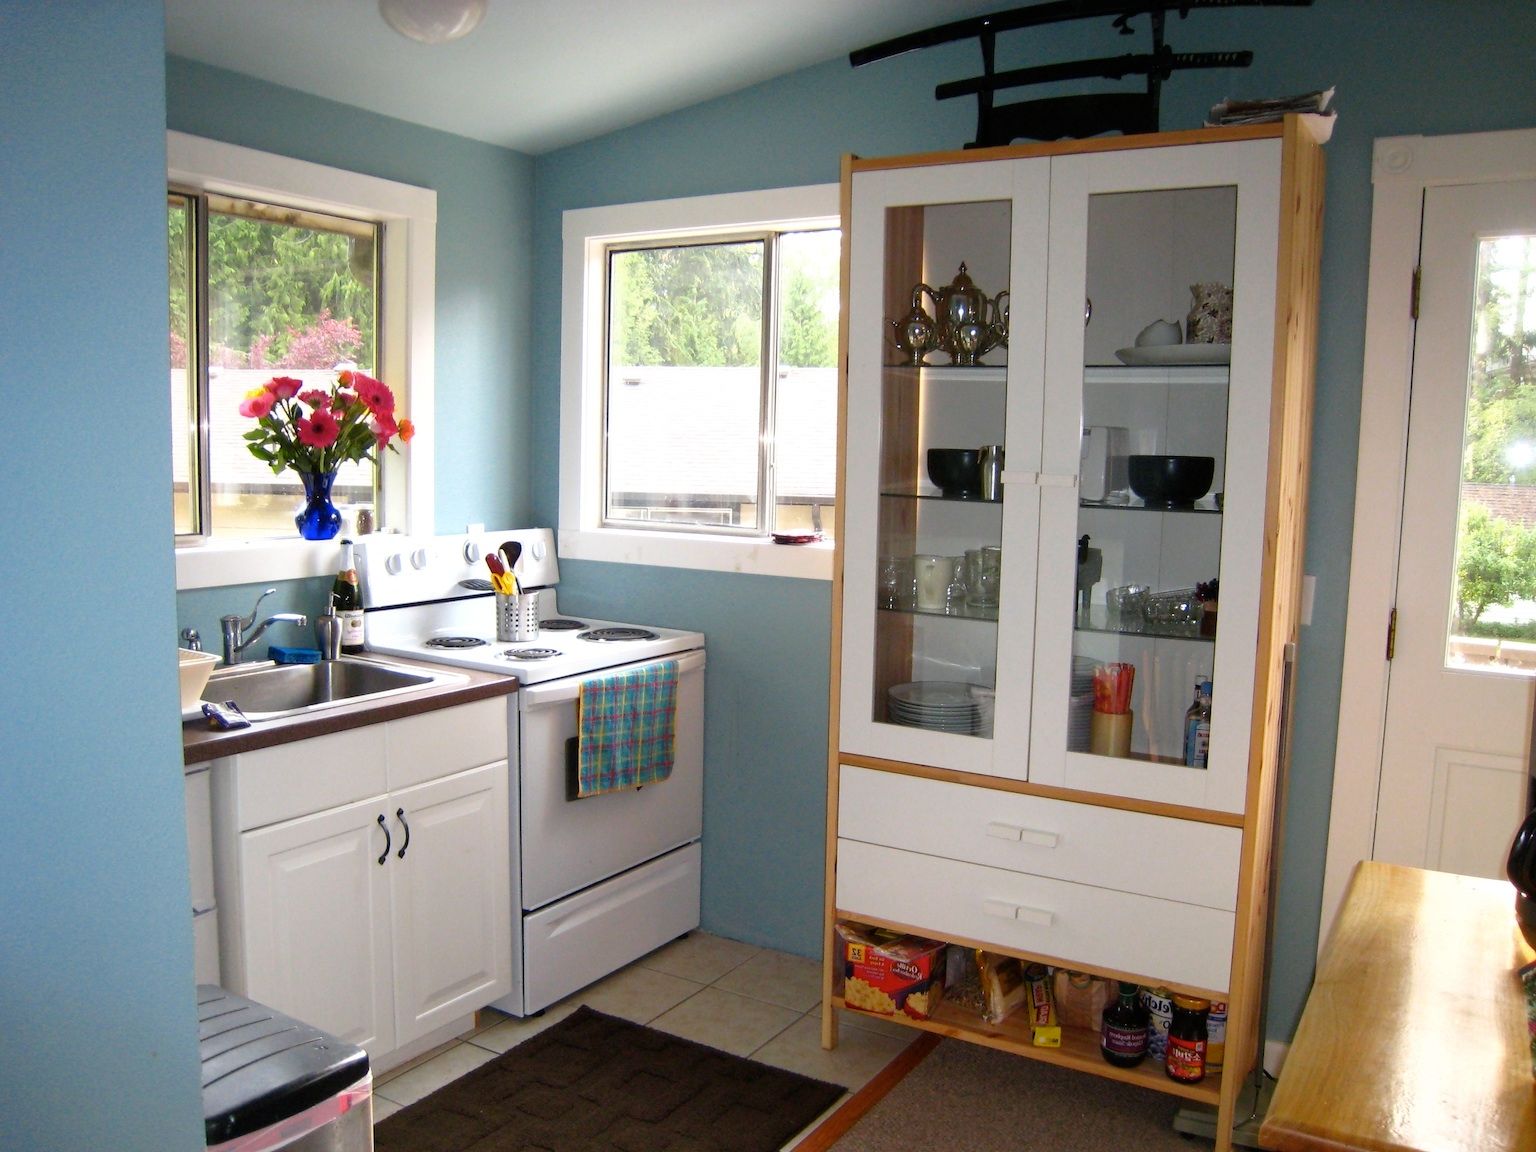 Vintage Glass Pantry Cabinet In Nice Kitchen Remodel And Design With Light Blue Wall Color (Photo 3146 of 7825)